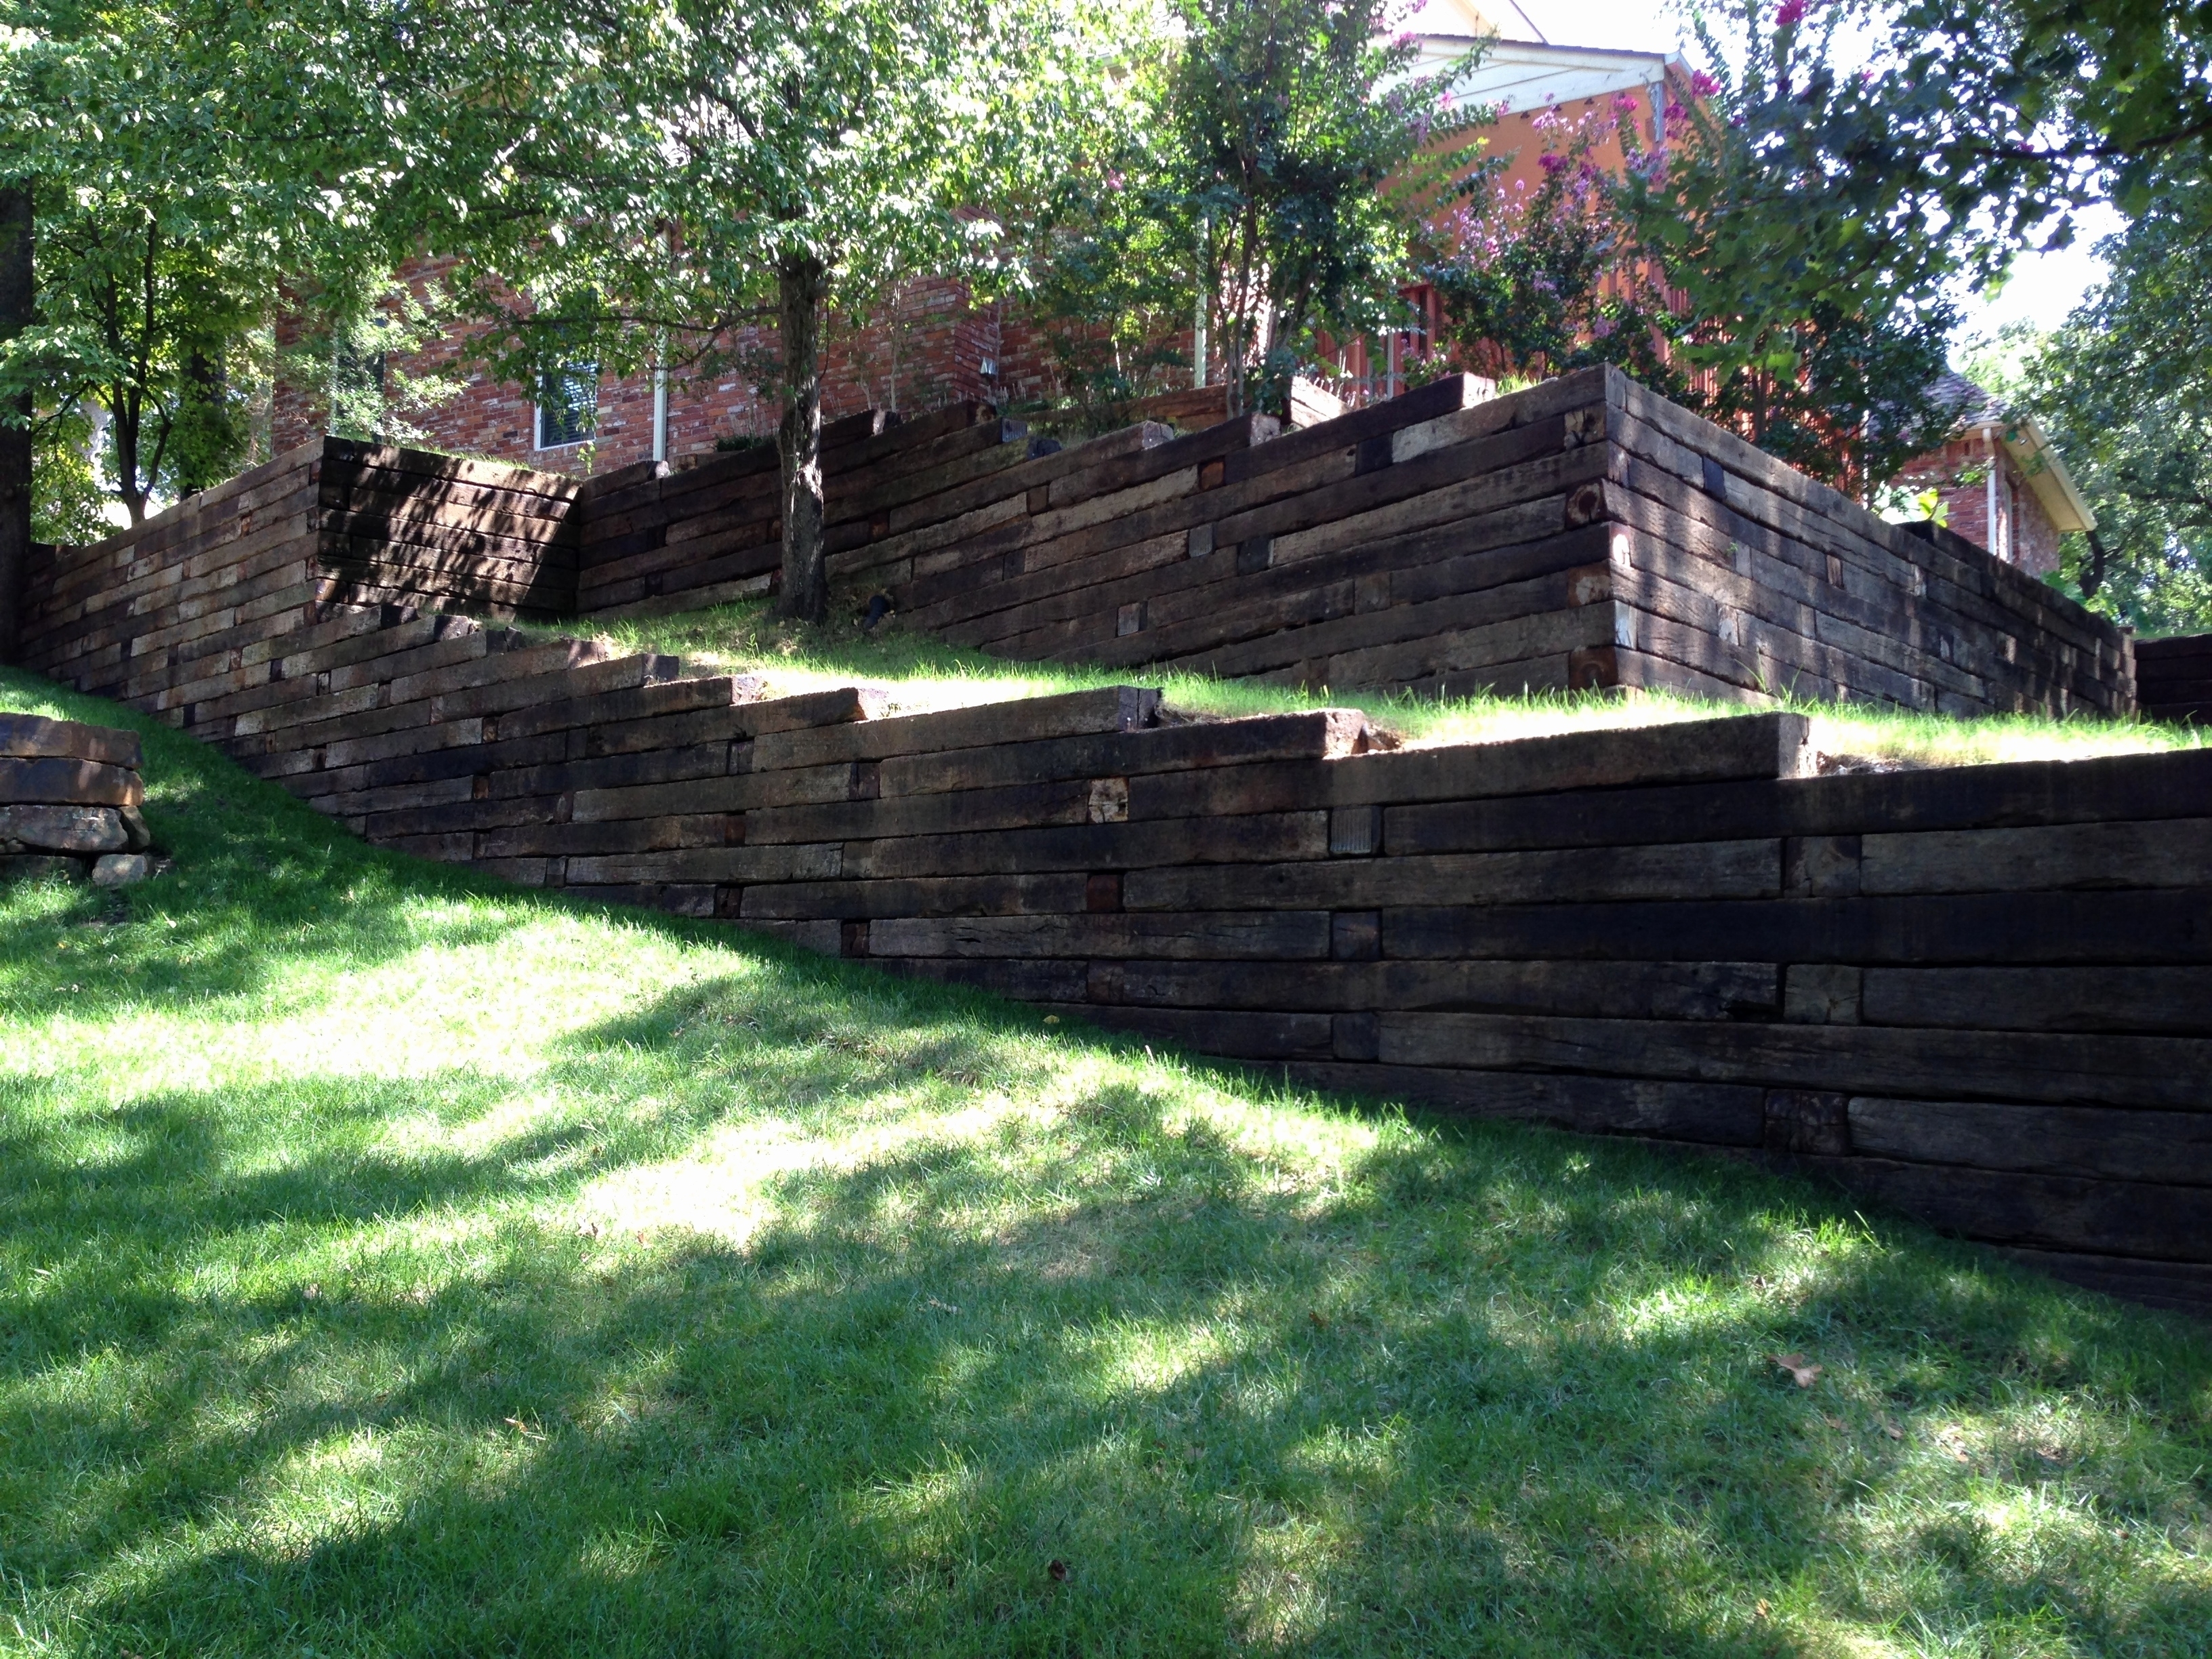 Landscape Using Stones And Railroad Ties Together